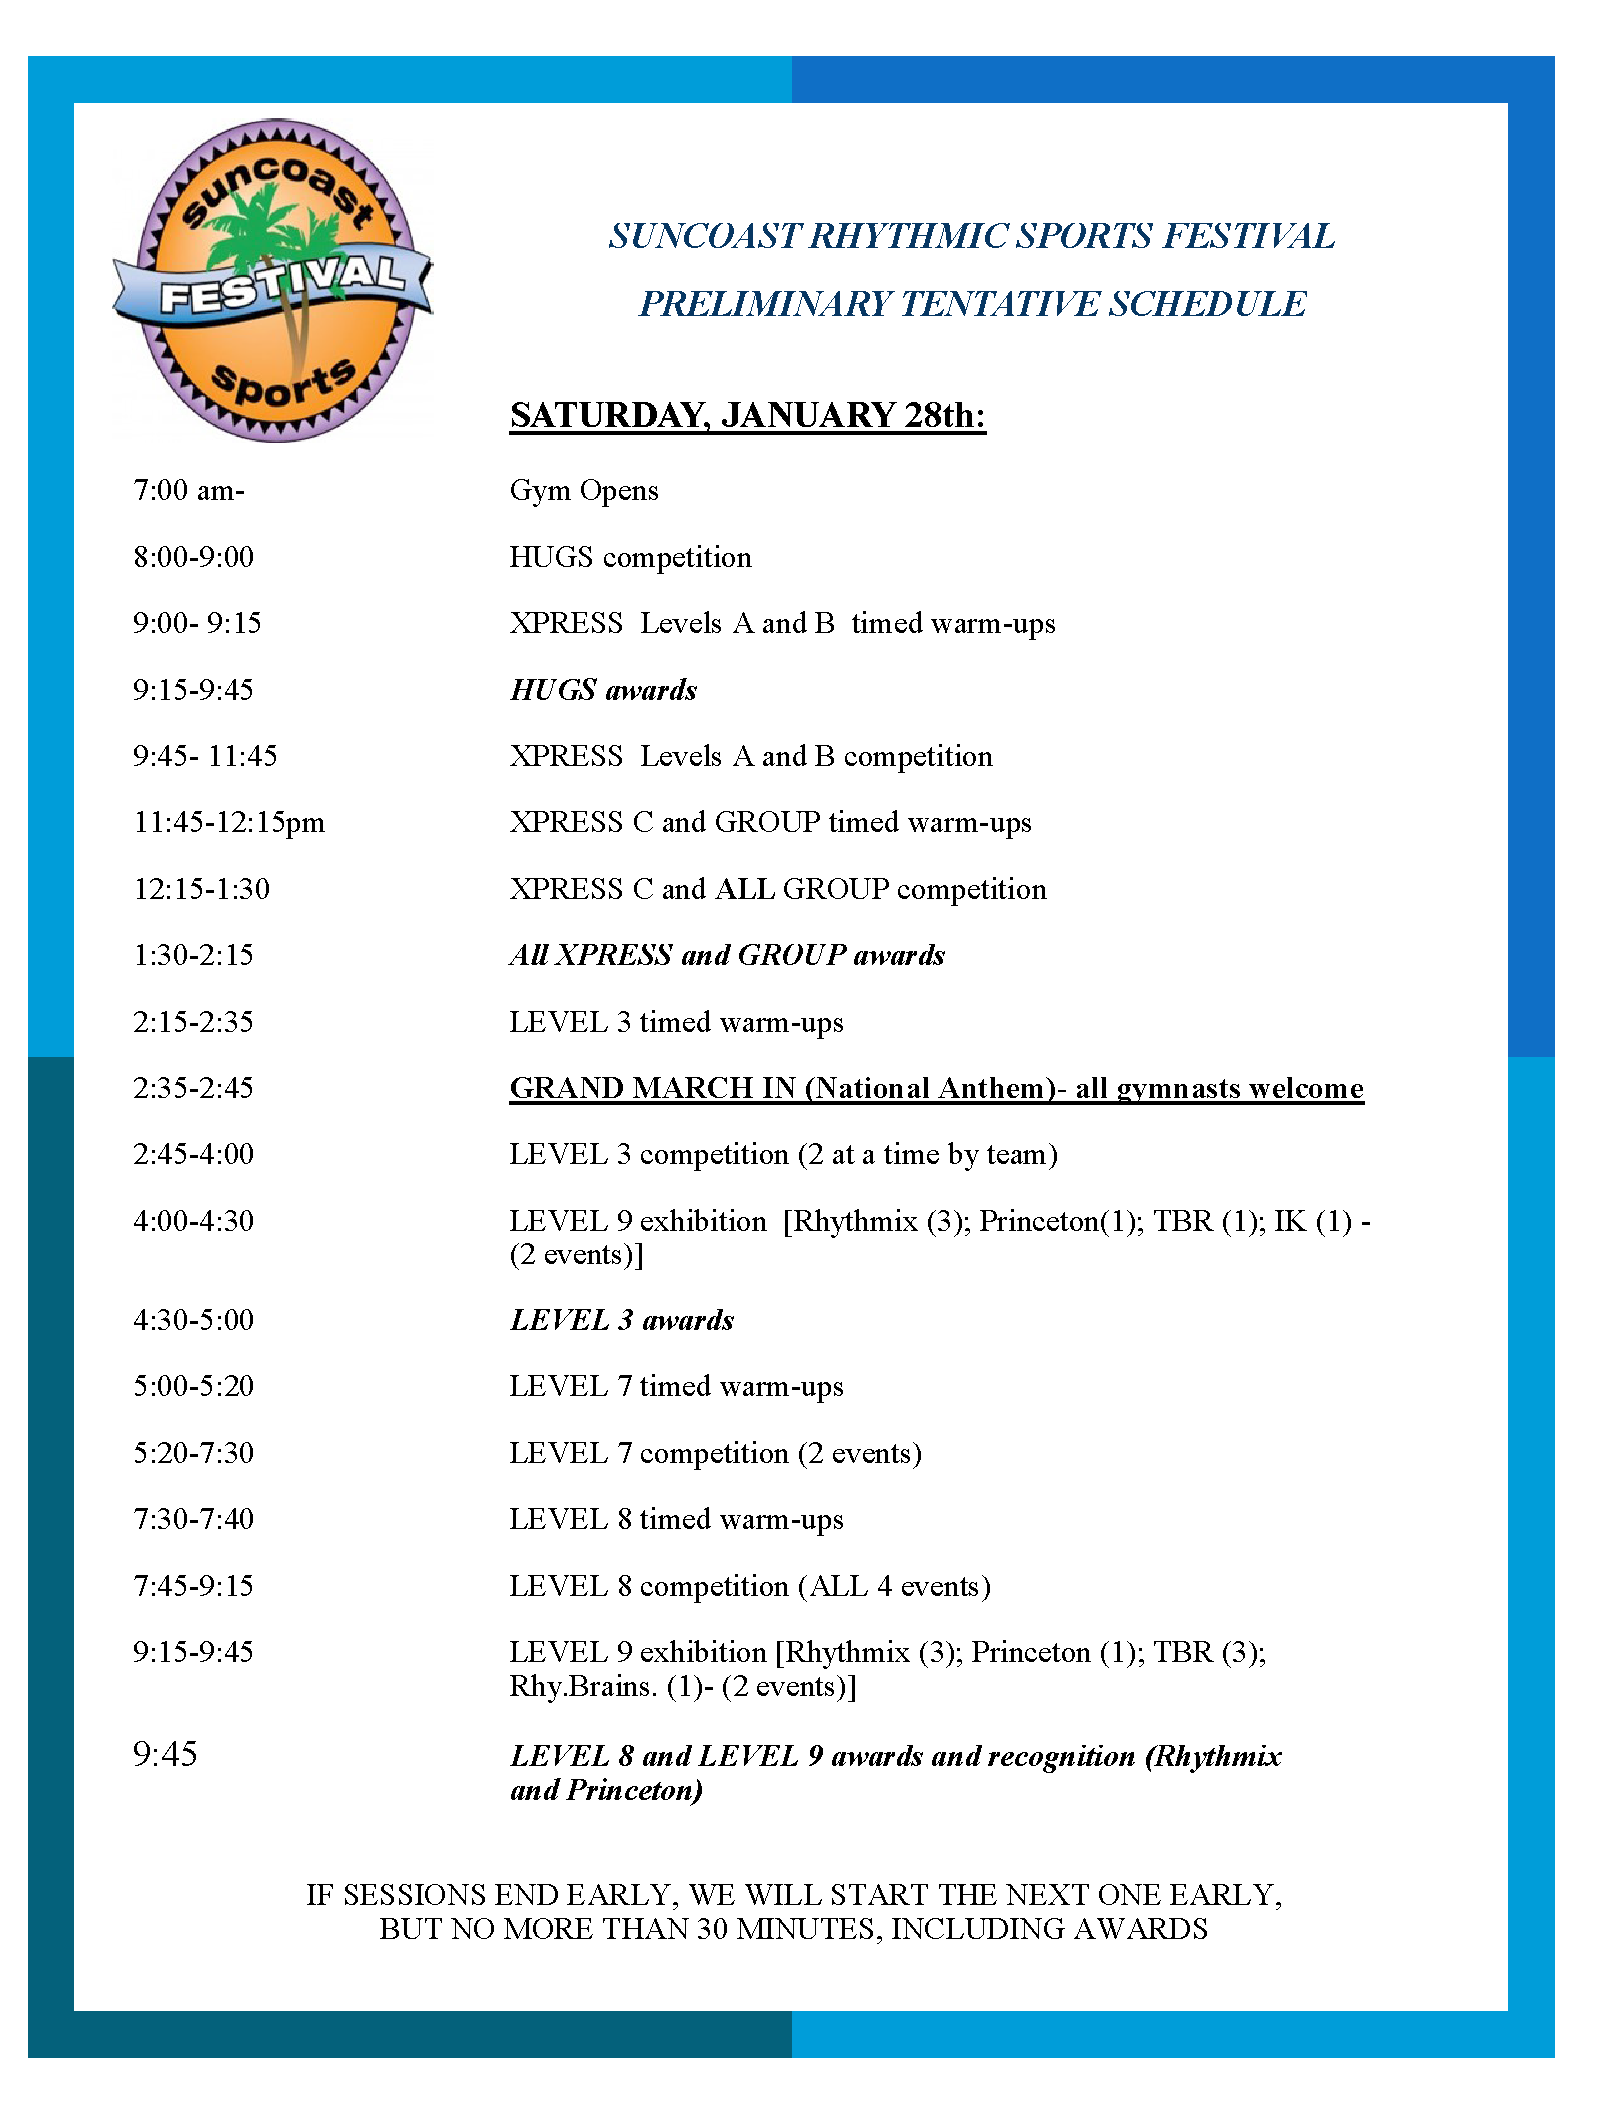 Competition schedule